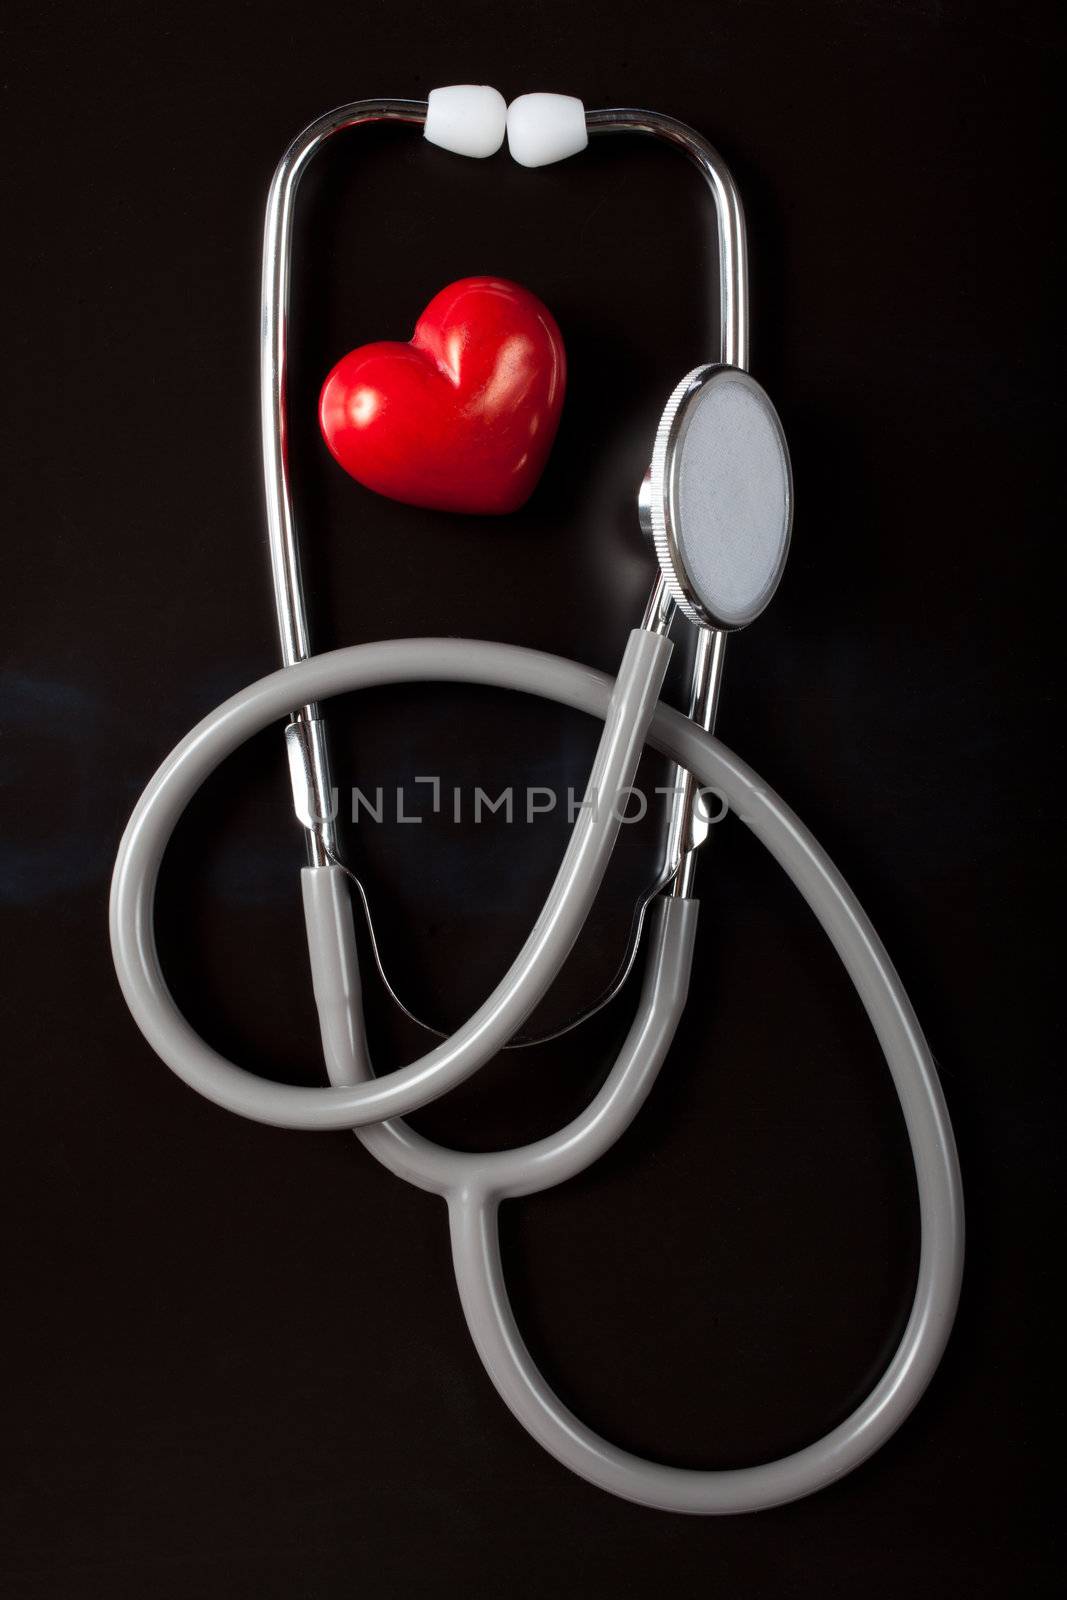 Stethoscope & red heart on black background